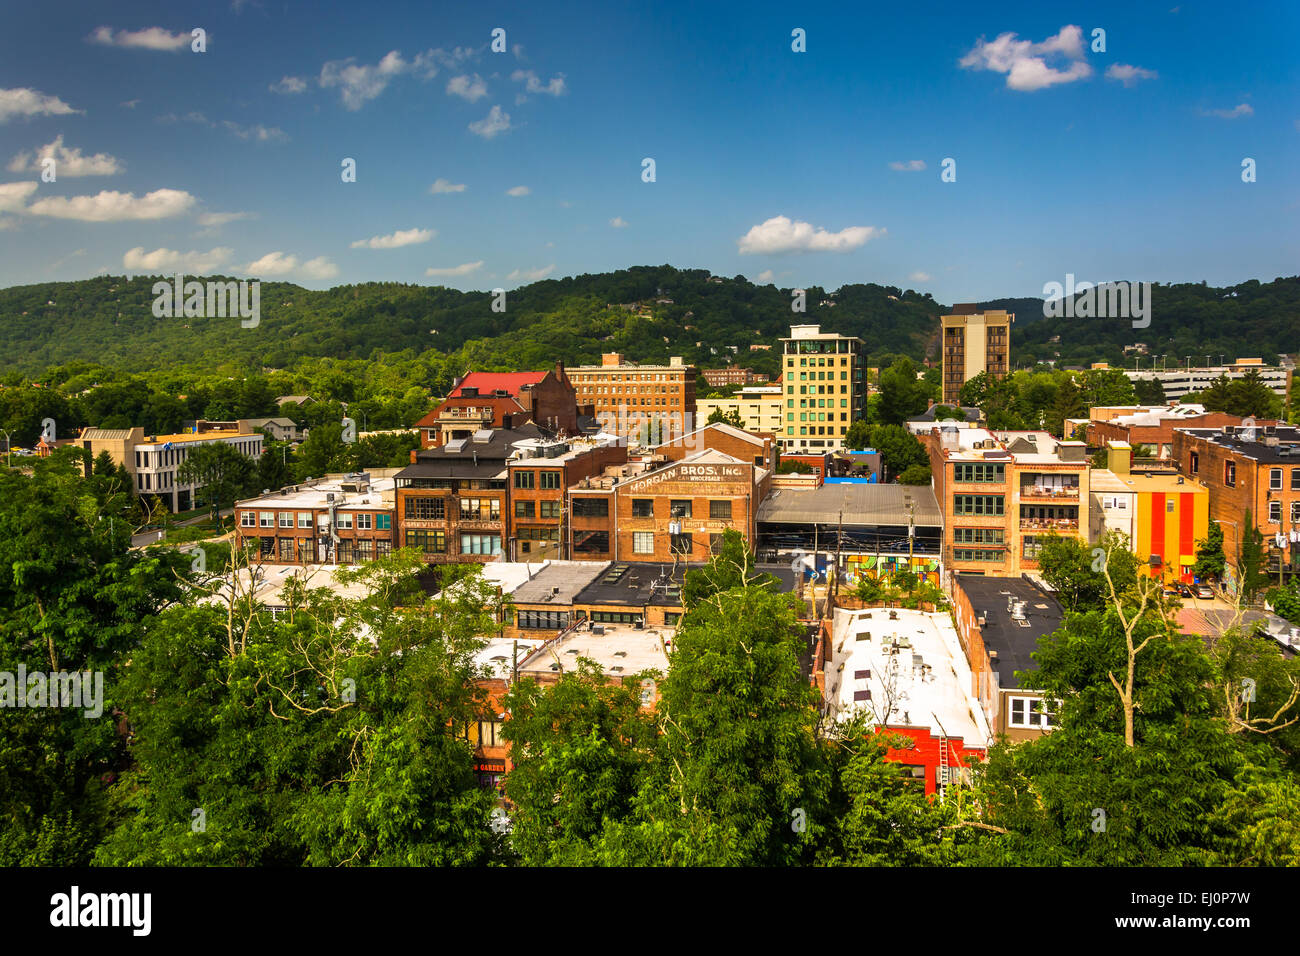 View of buildings from a parking garage in Asheville, North Carolina. Stock Photo